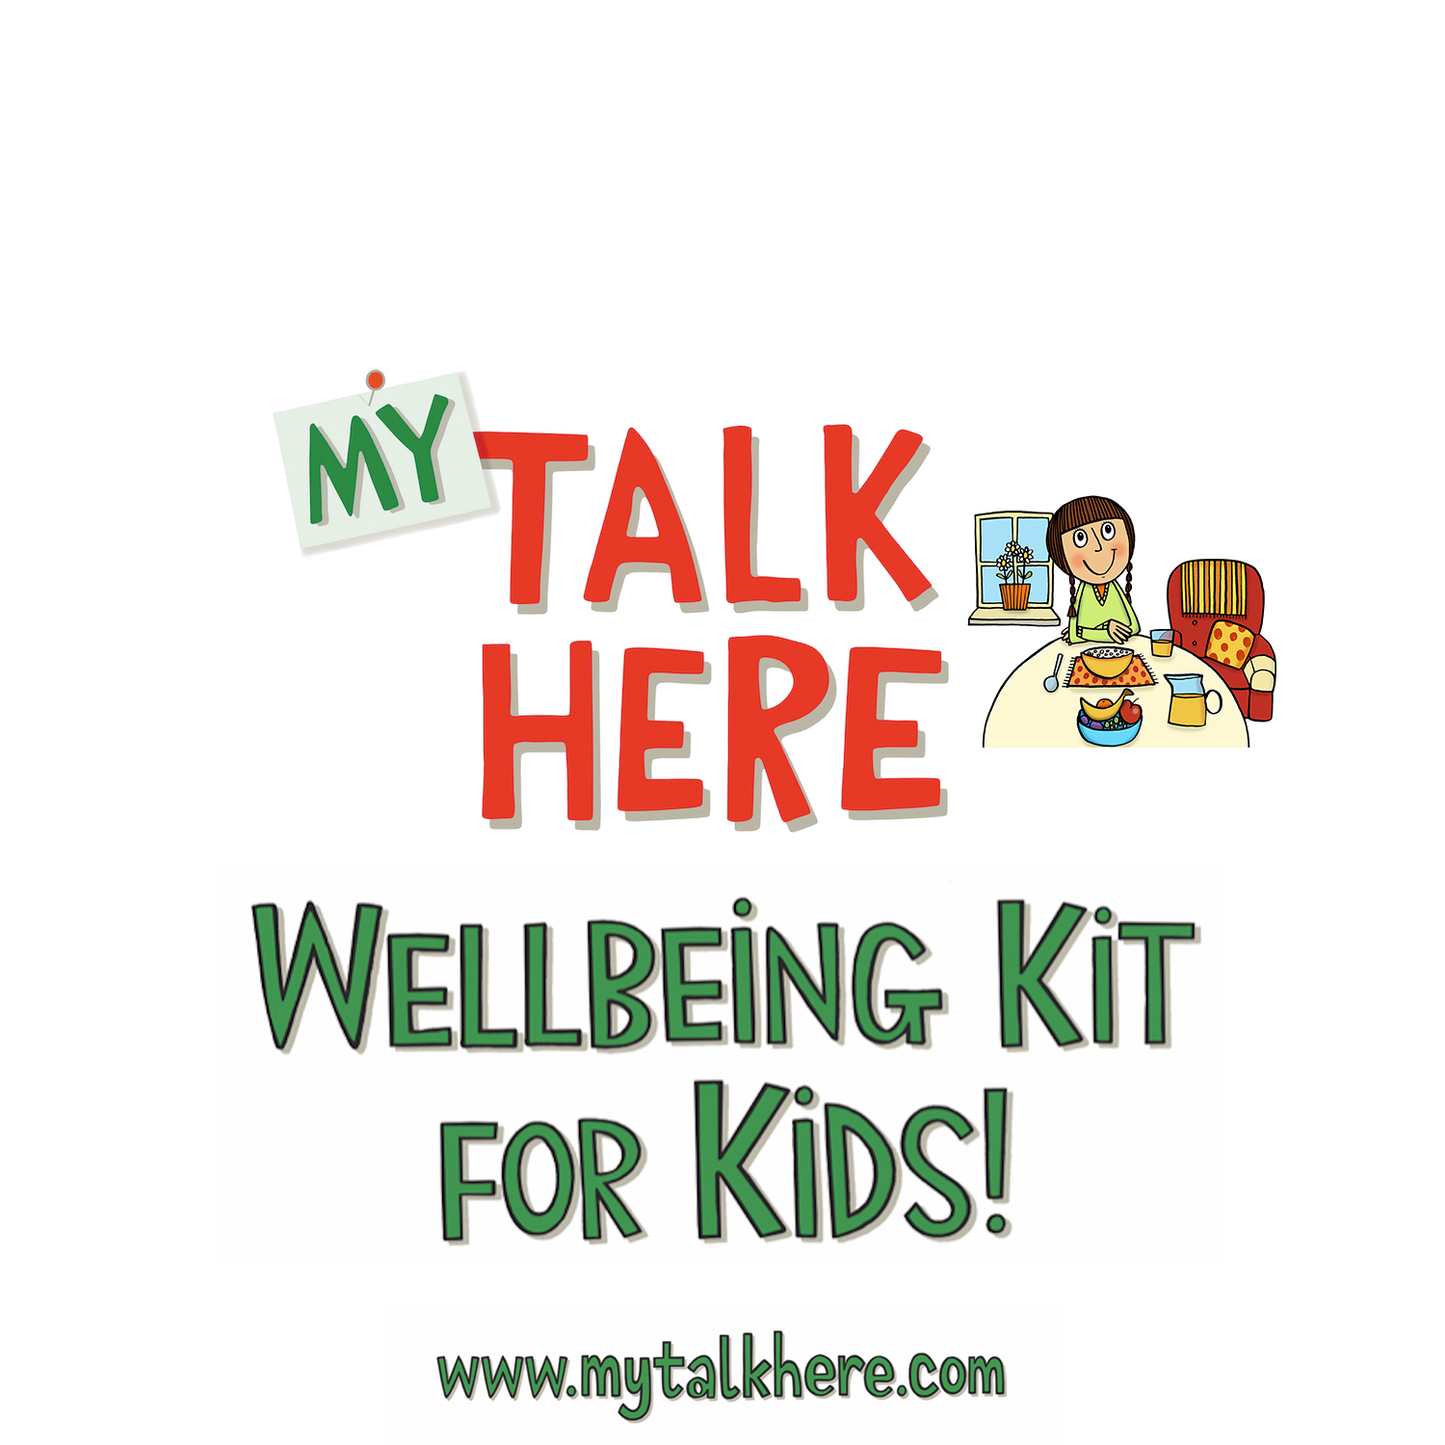 WELLBEING KIT FOR KIDS! (Personal Licence)